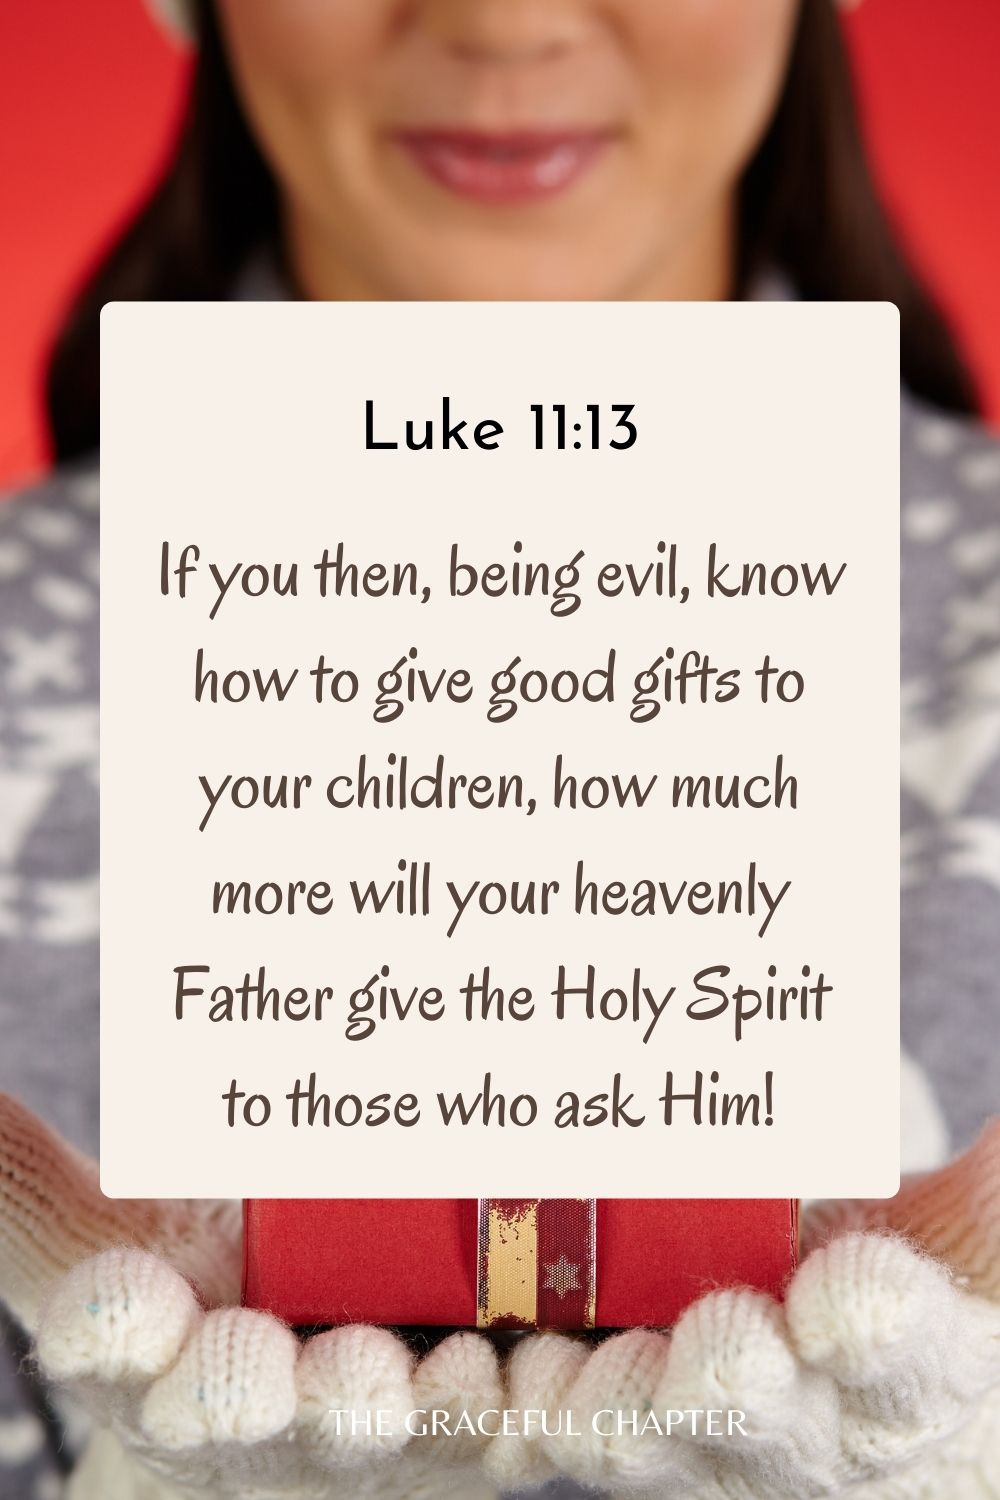 If you then, being evil, know how to give good gifts to your children, how much more will your heavenly Father give the Holy Spirit to those who ask Him! Luke 11:13